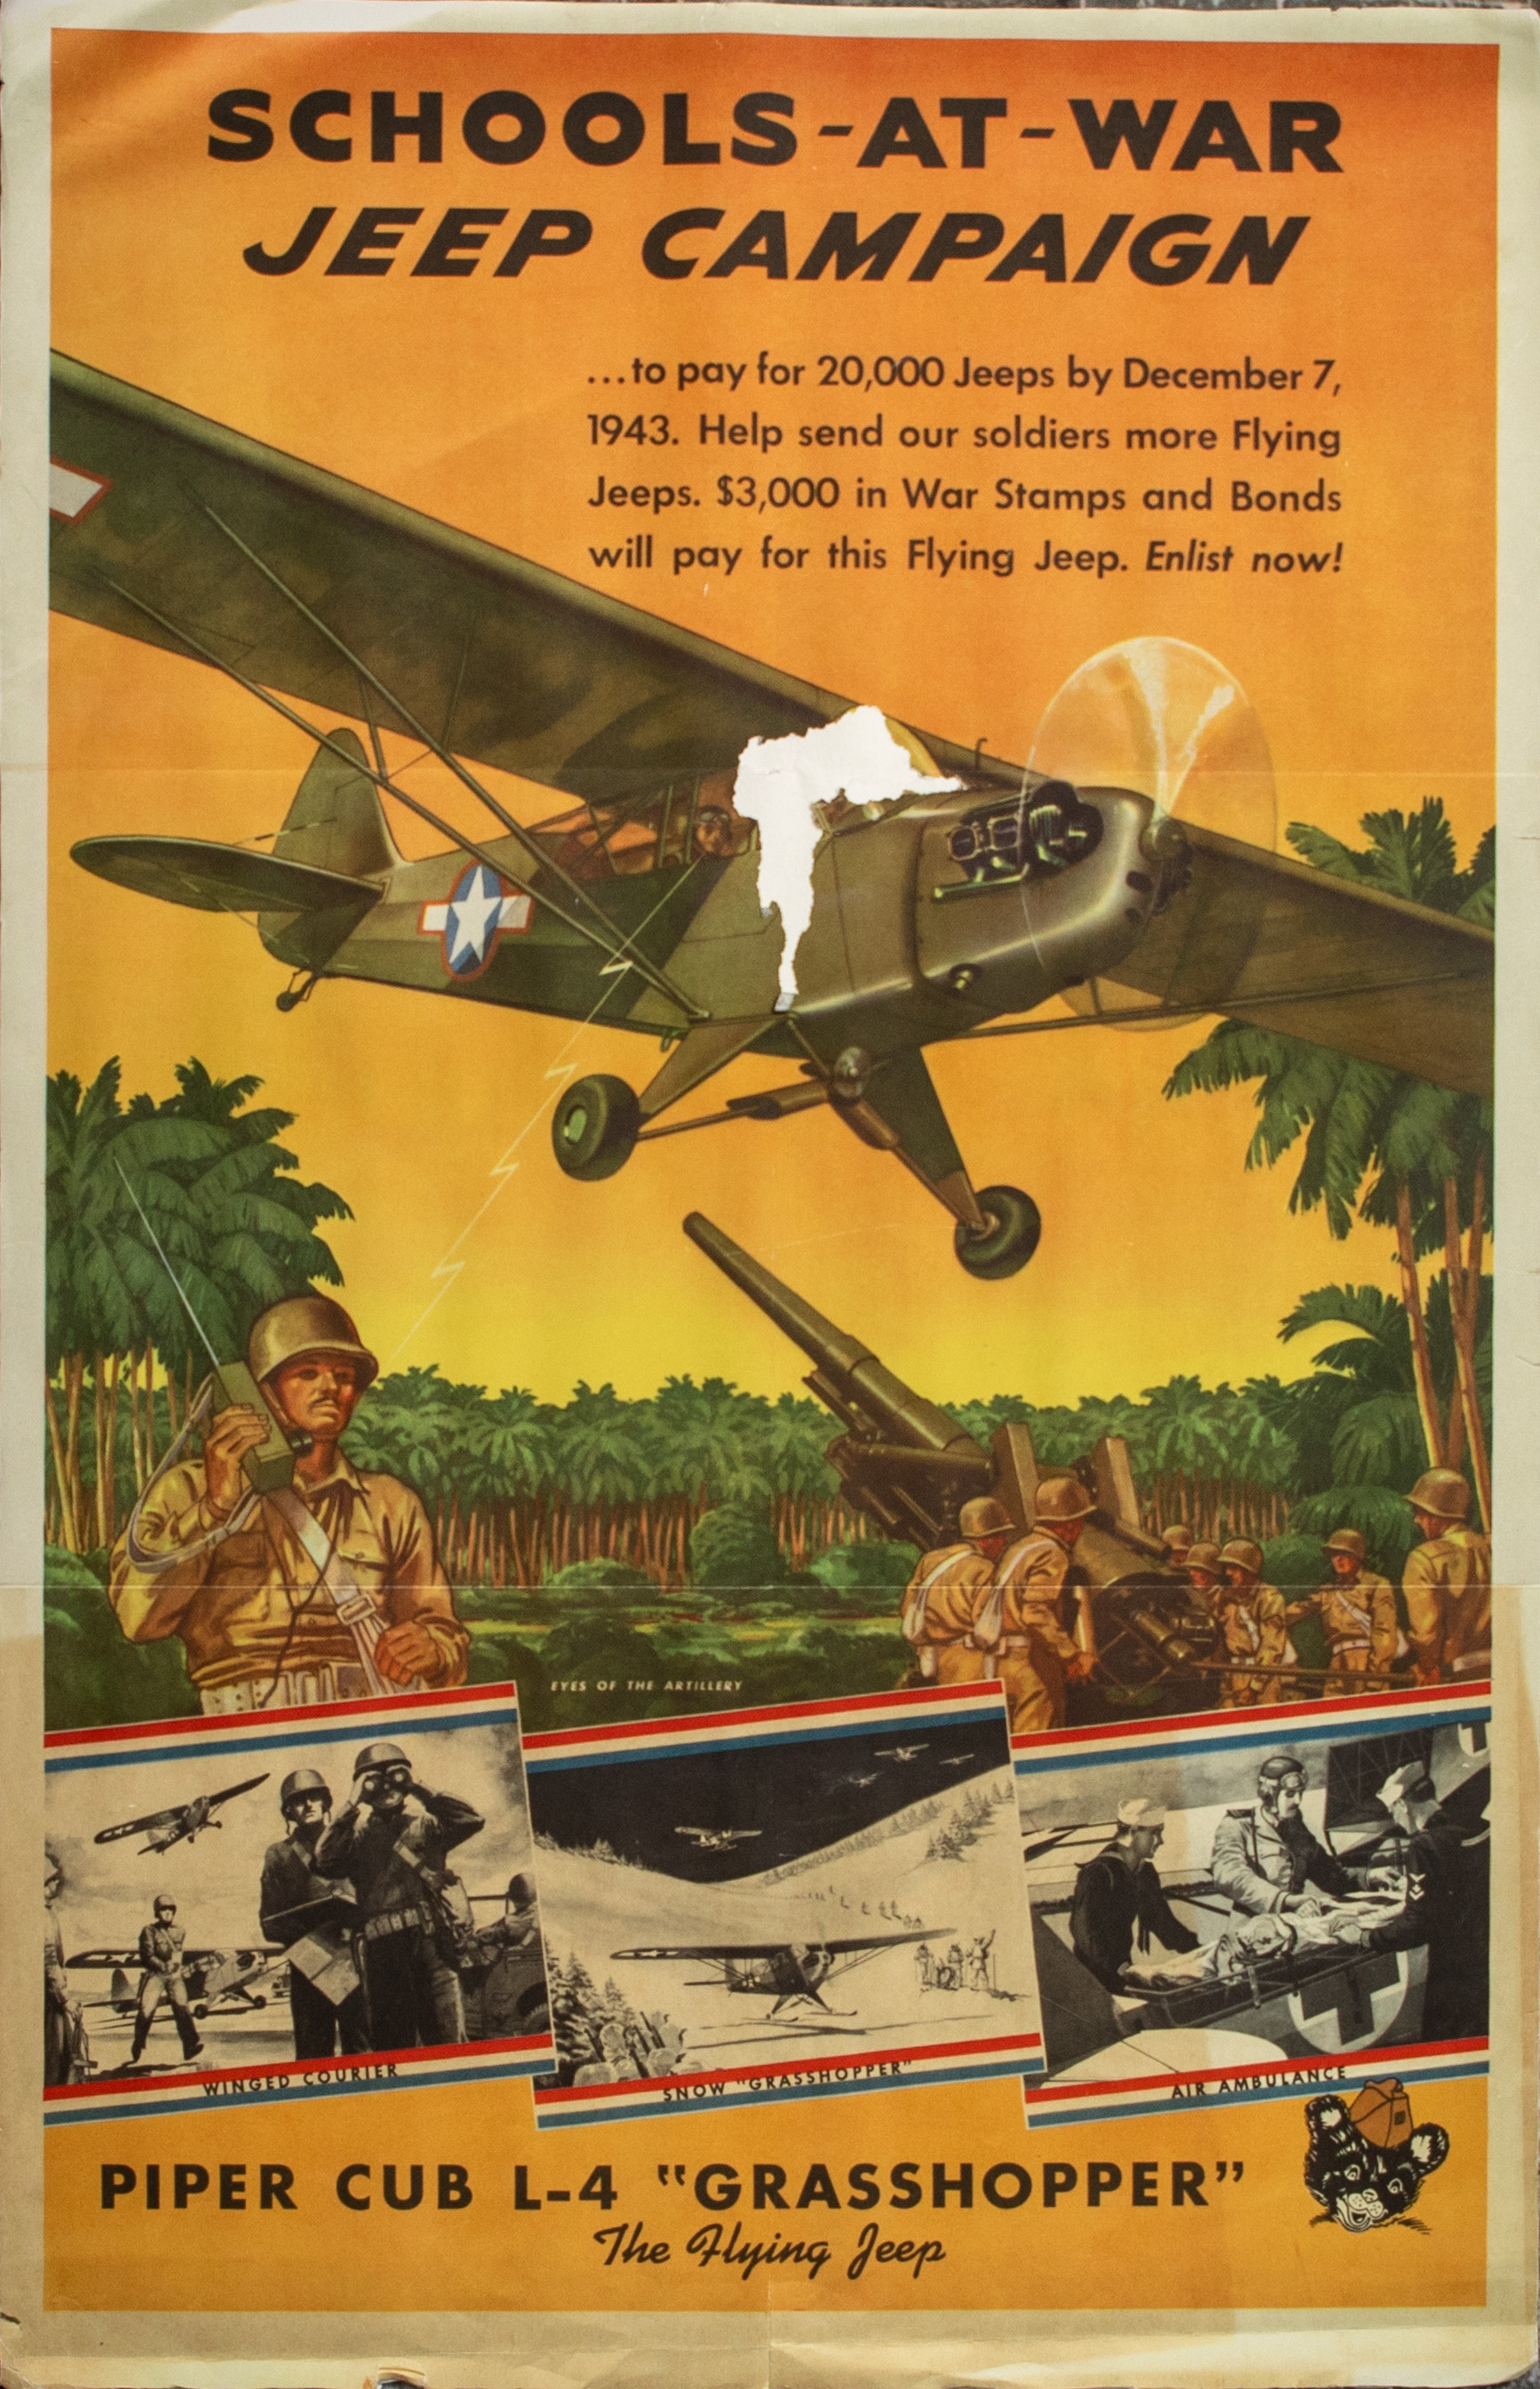 Jeep Campaign poster